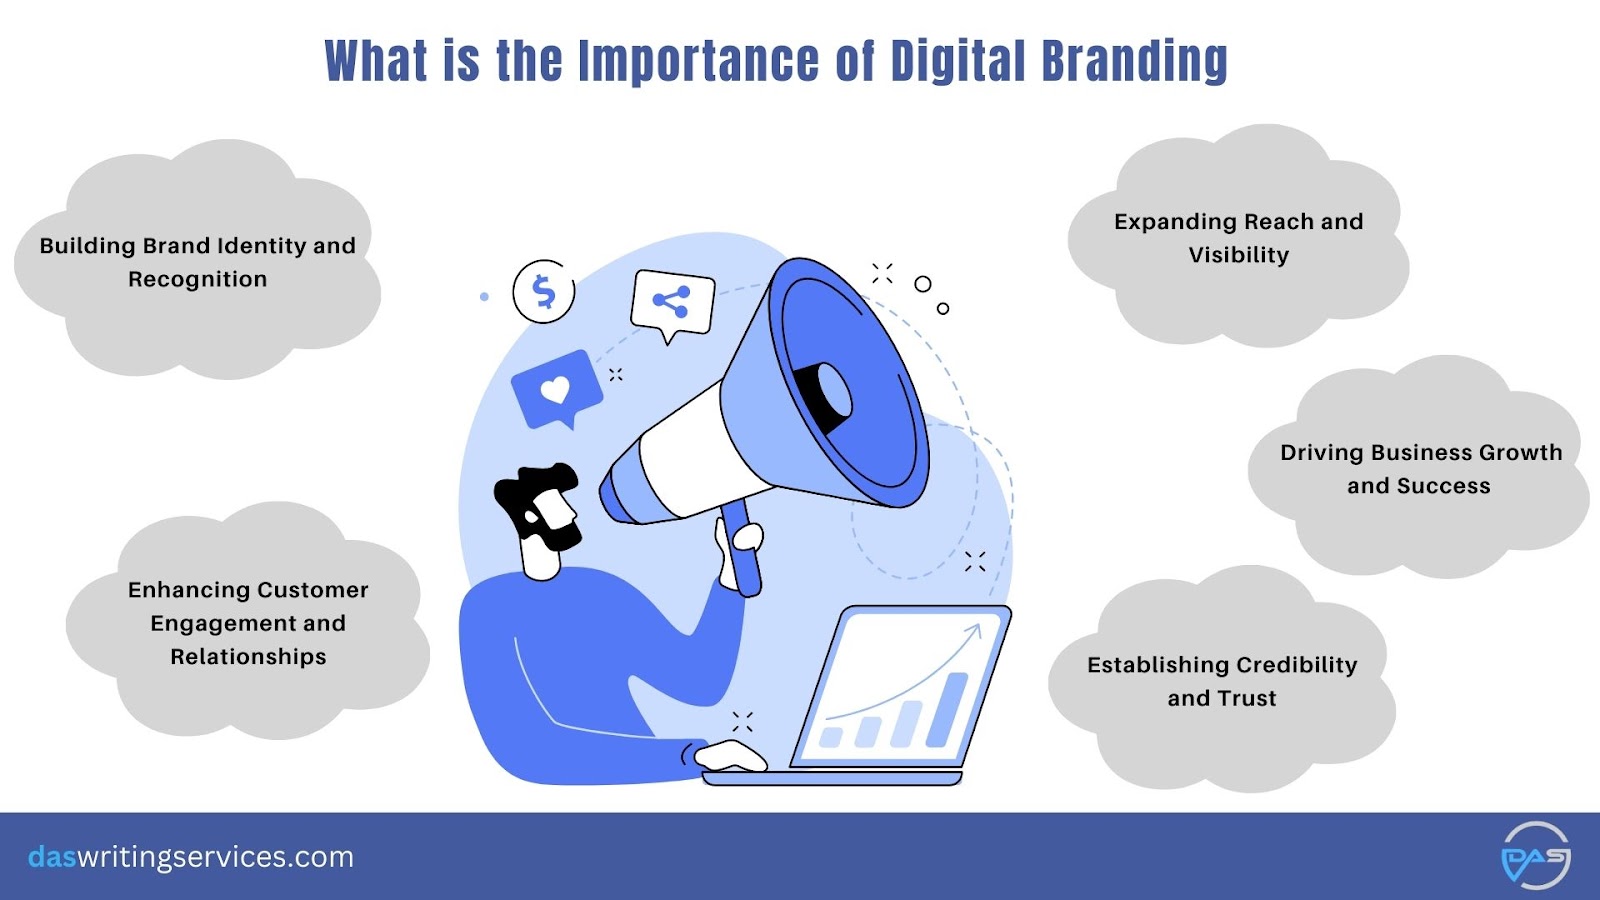 What is the importance of digital branding